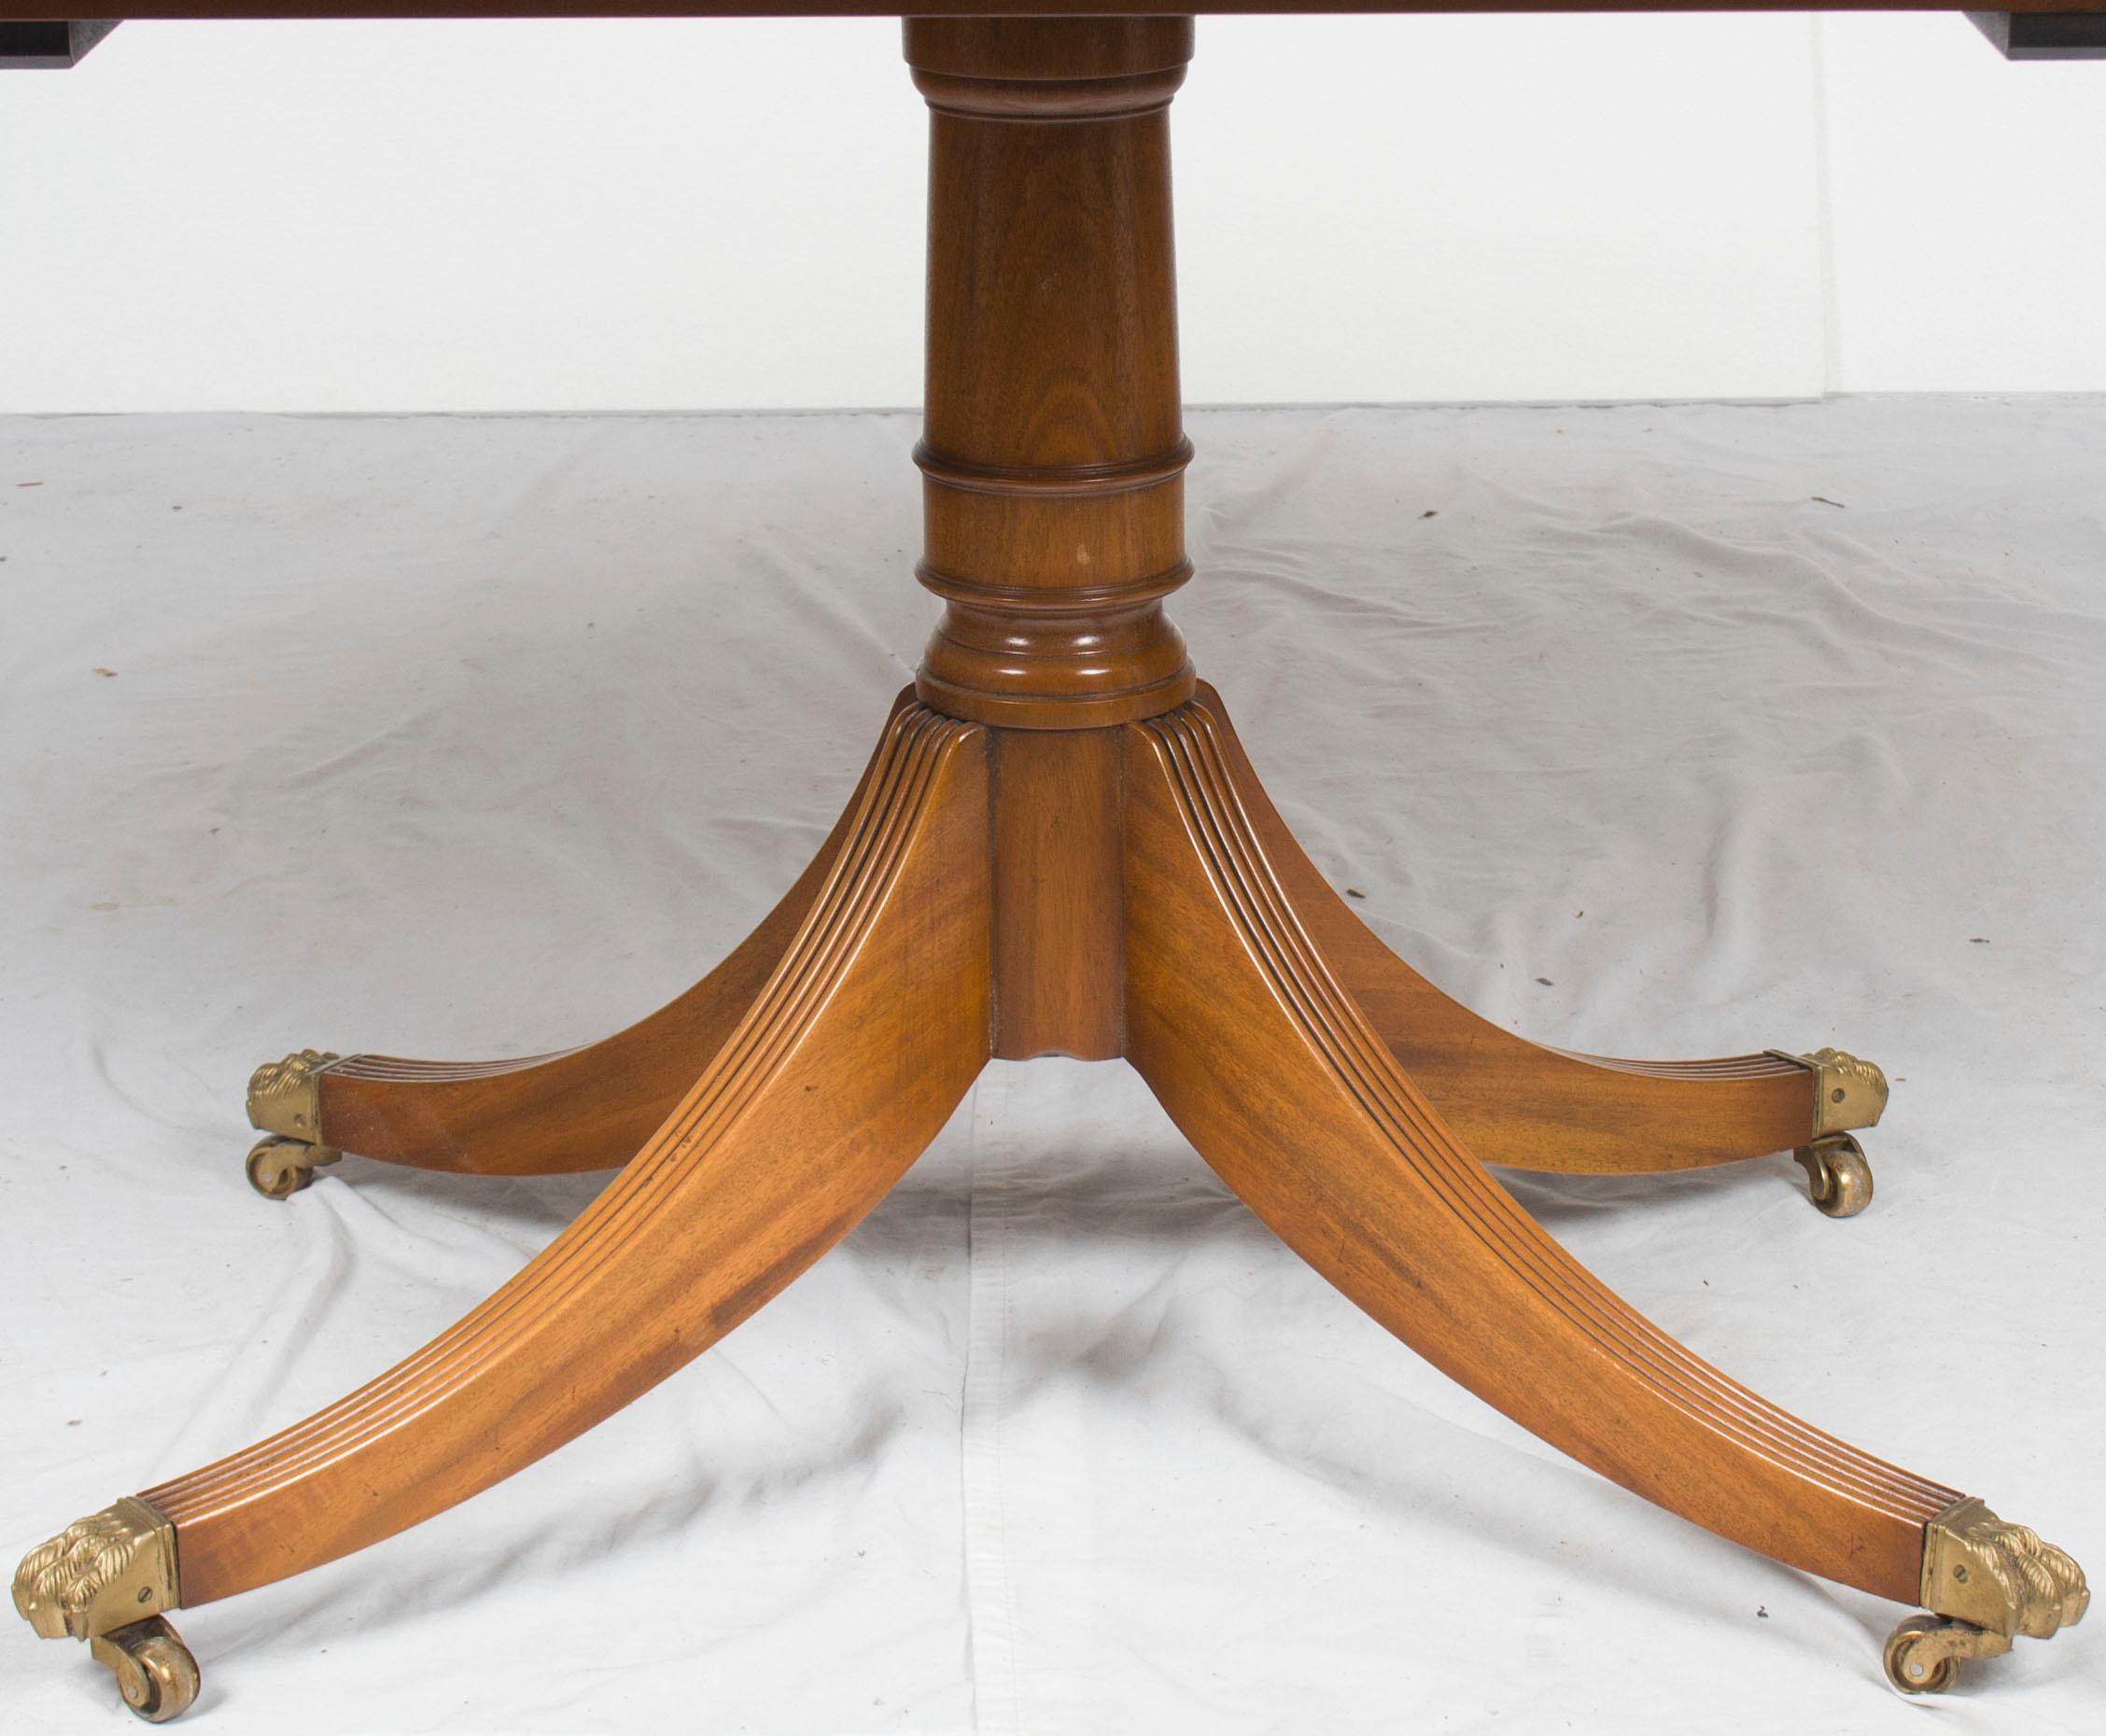 This gorgeous yew dining table was crafted in England in the year 1960 by Rackstraw. Today, the yew remains quite beautiful, with a rich complexion and a pronounced grain that are sure to complement any setting. With a single leaf that expands the